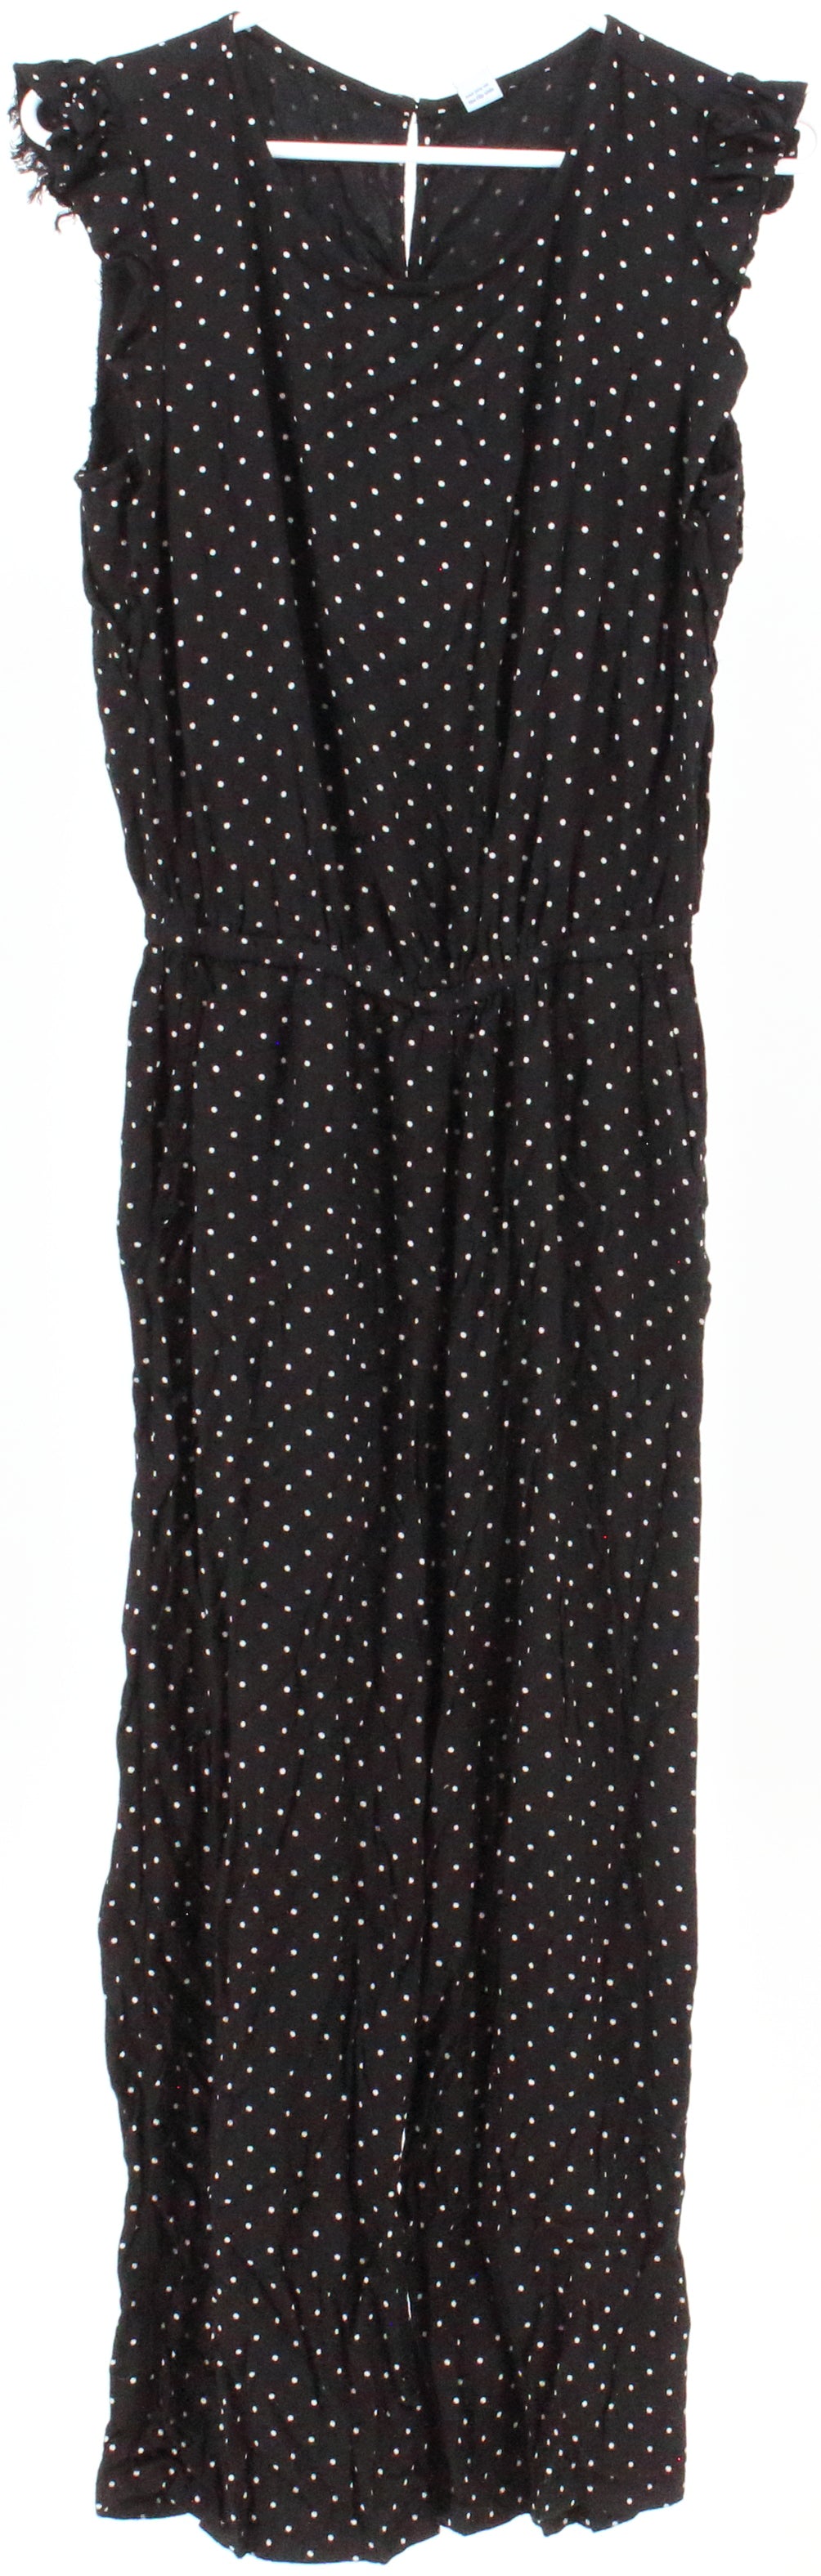 Old Navy Black and White Dots Long Jumpsuit